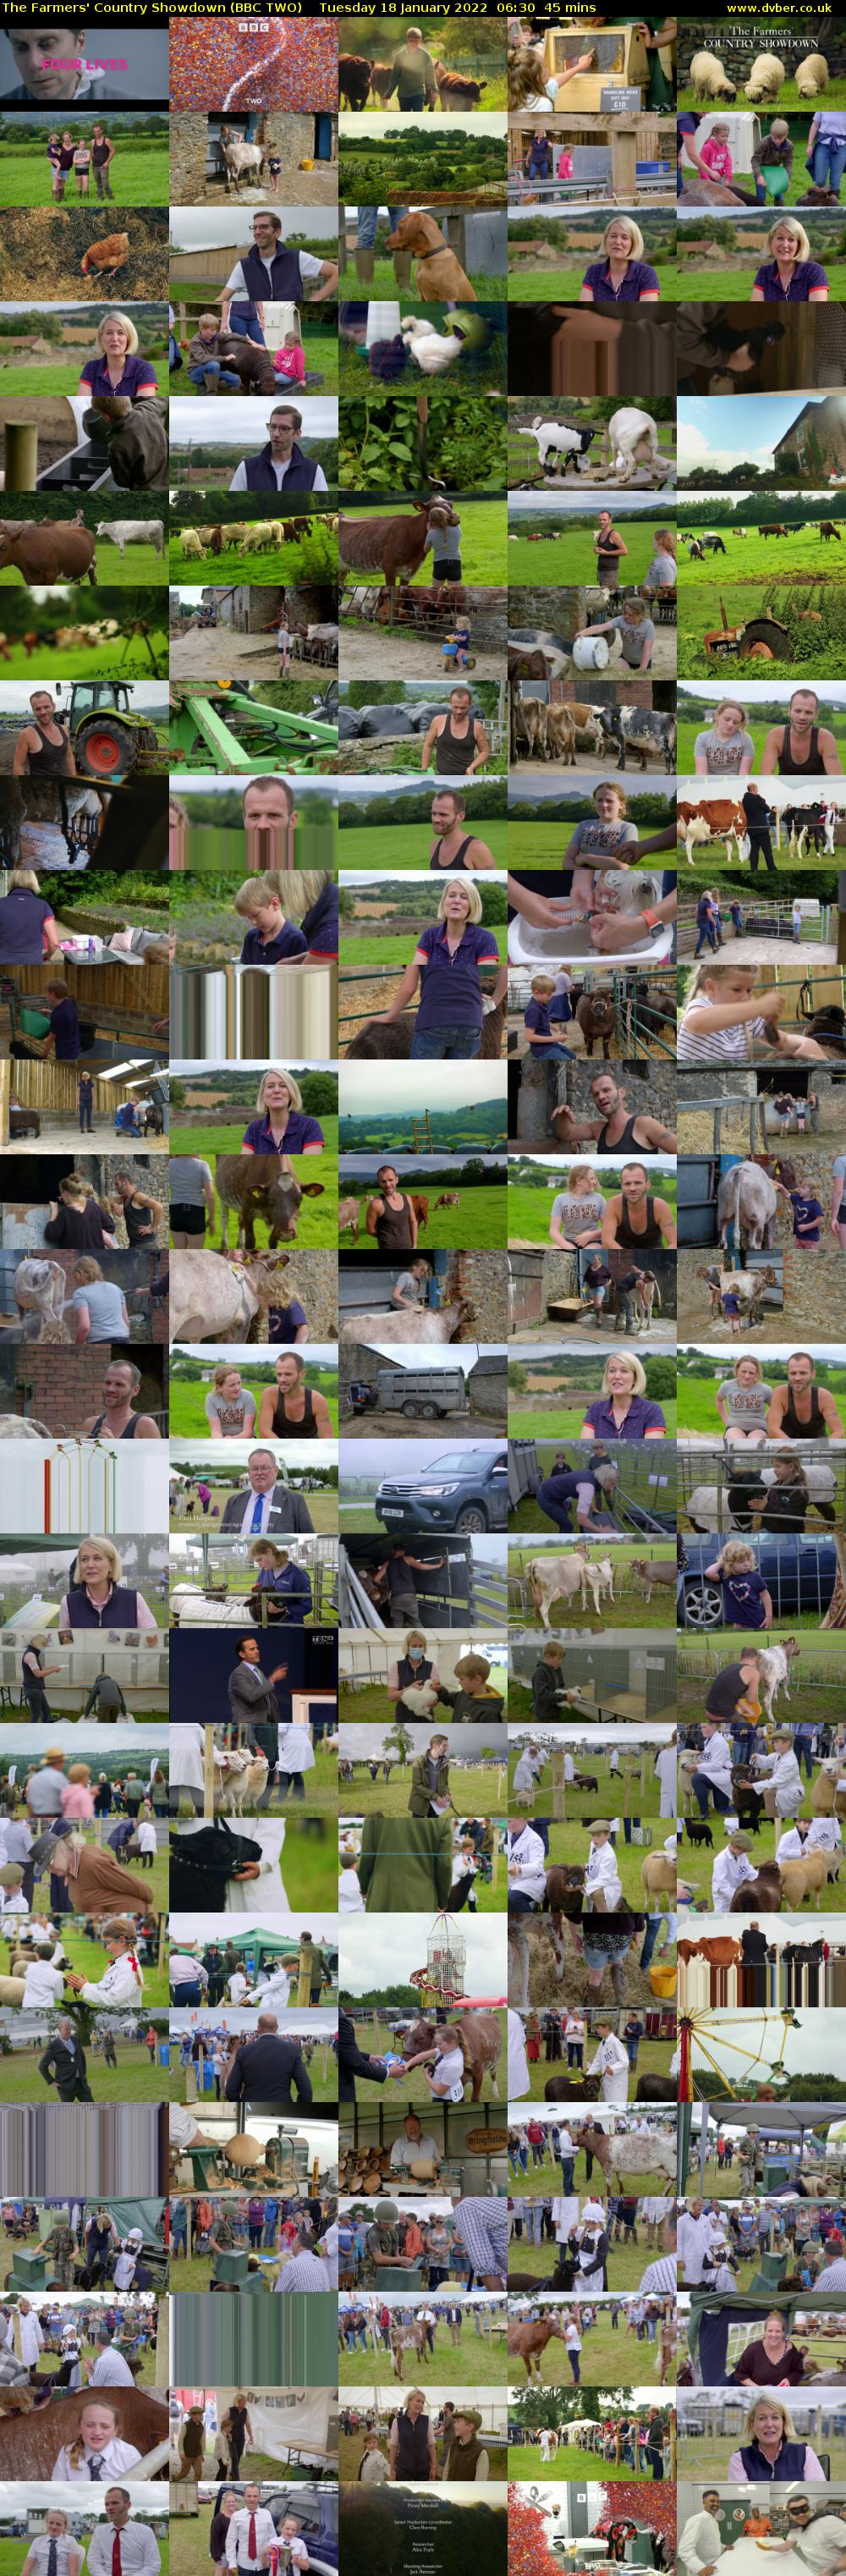 The Farmers' Country Showdown (BBC TWO) Tuesday 18 January 2022 06:30 - 07:15